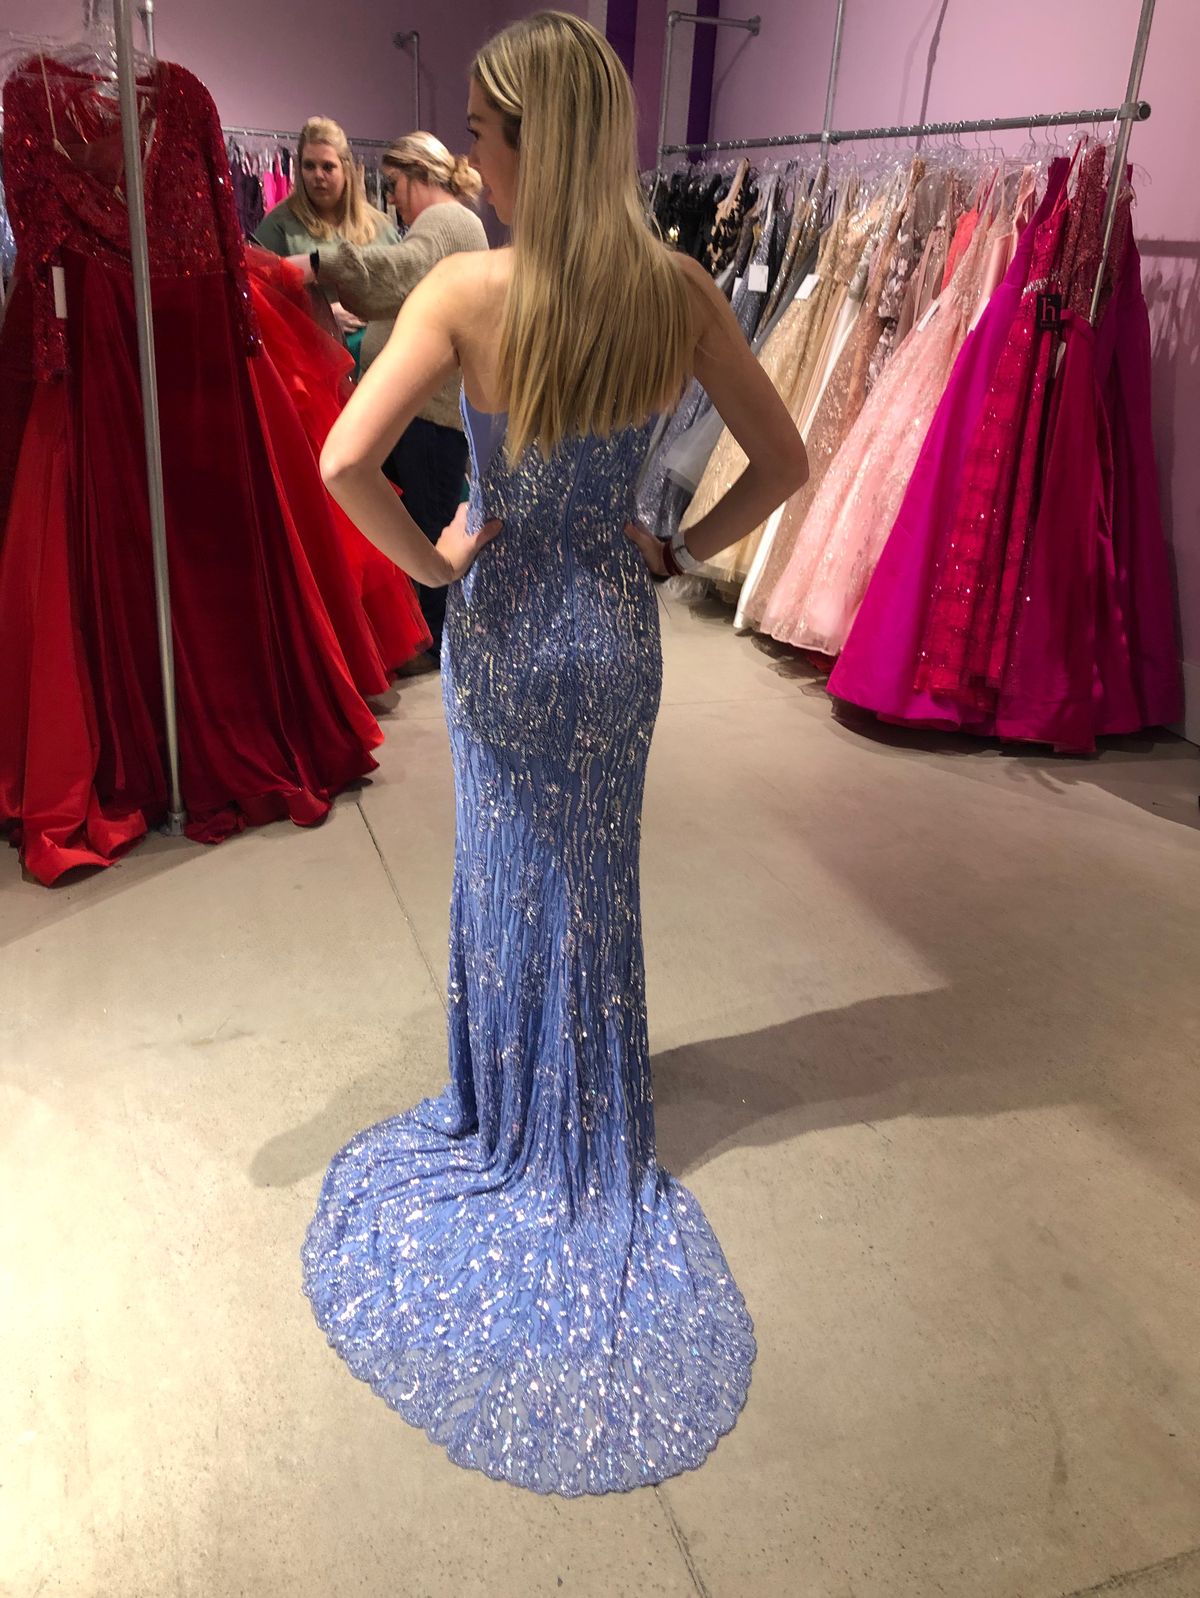 Style 53441 Sherri Hill Size 0 Prom High Neck Light Blue Side Slit Dress on Queenly